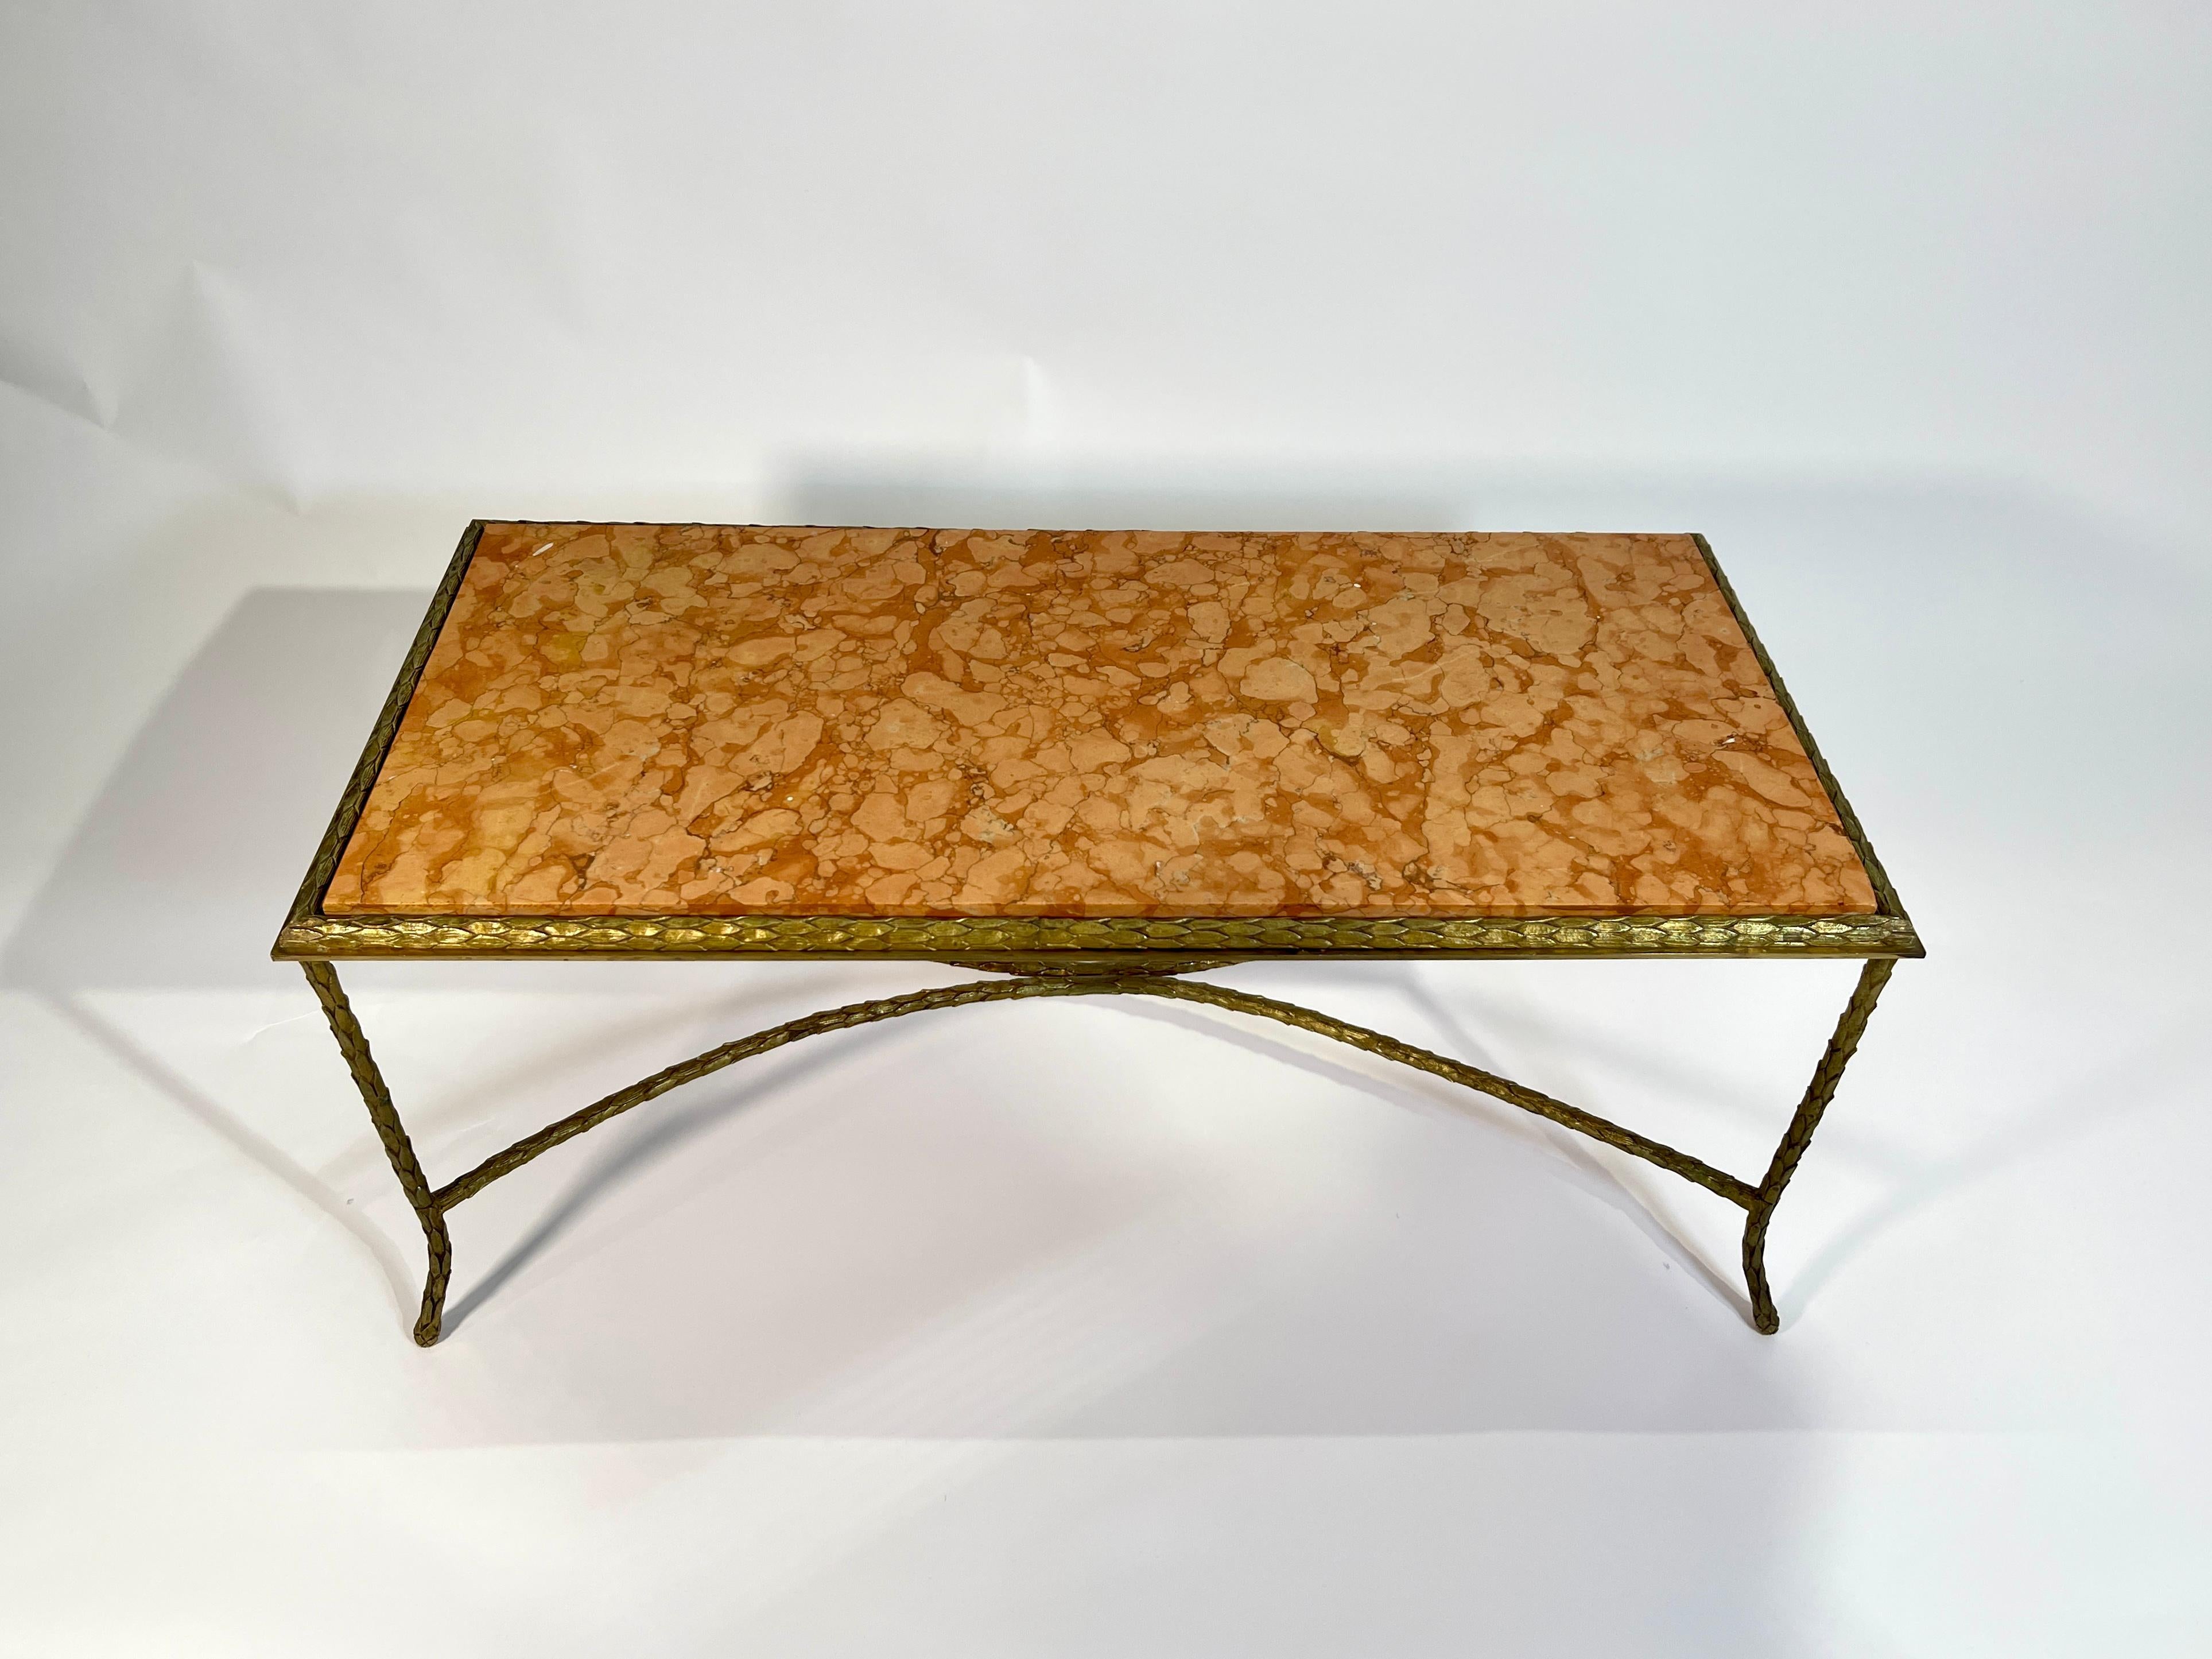 Coffee table by Maison Baguès in gilt bronze, white original marble top.

Since its establishment in 1860, the Maison Baguès has been an emblem of French sophistication in luxury lighting design. Each piece the firm makes is hand assembled using